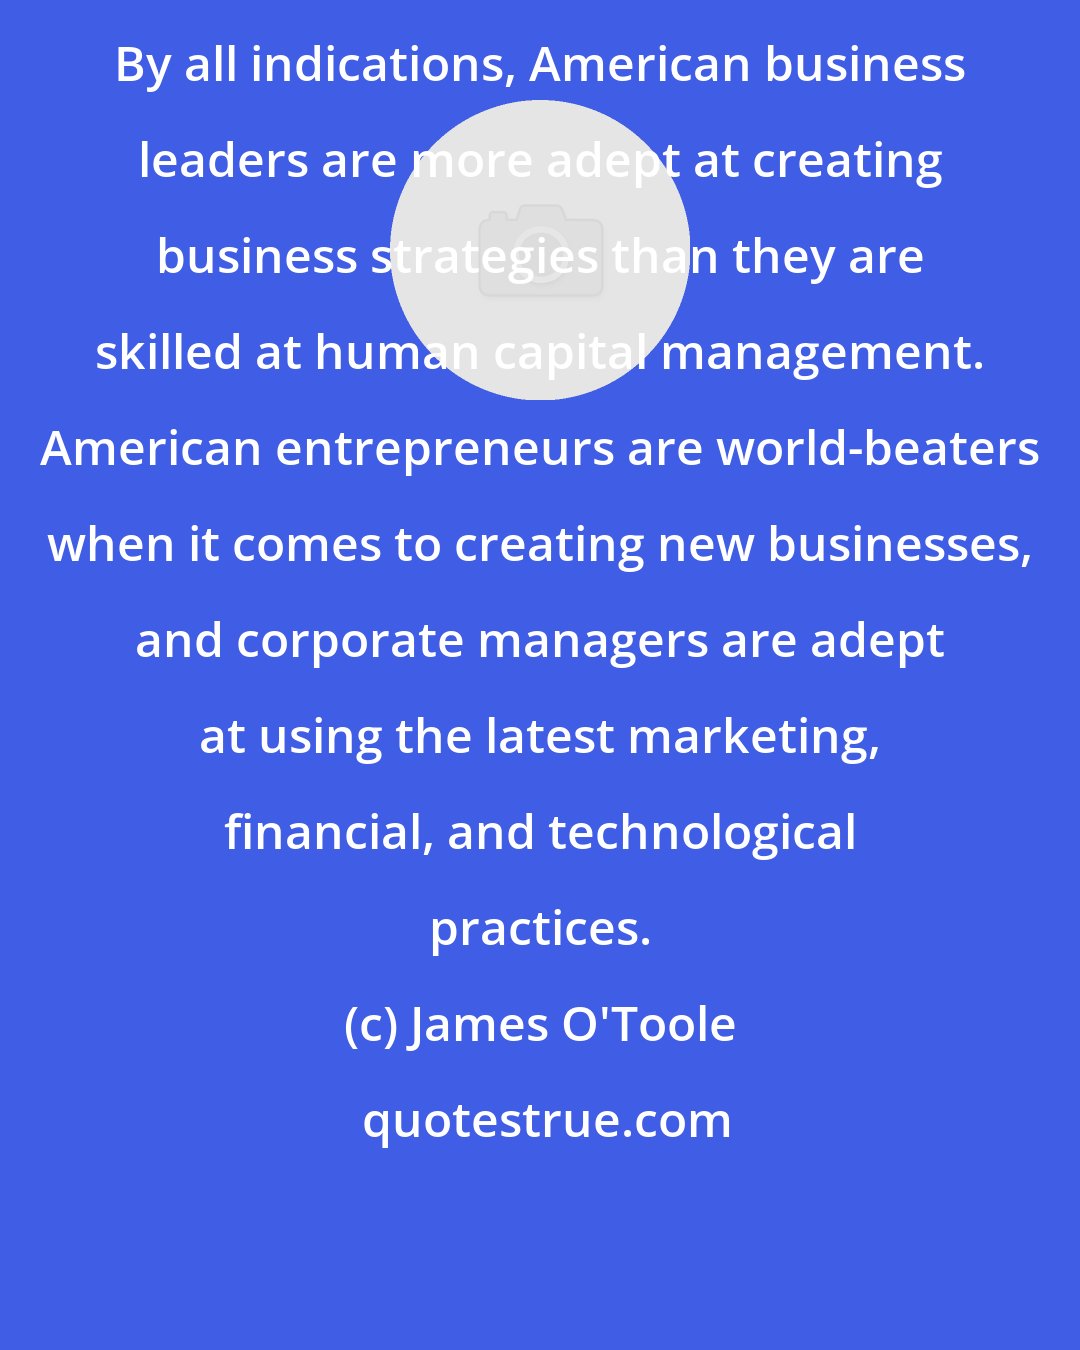 James O'Toole: By all indications, American business leaders are more adept at creating business strategies than they are skilled at human capital management. American entrepreneurs are world-beaters when it comes to creating new businesses, and corporate managers are adept at using the latest marketing, financial, and technological practices.